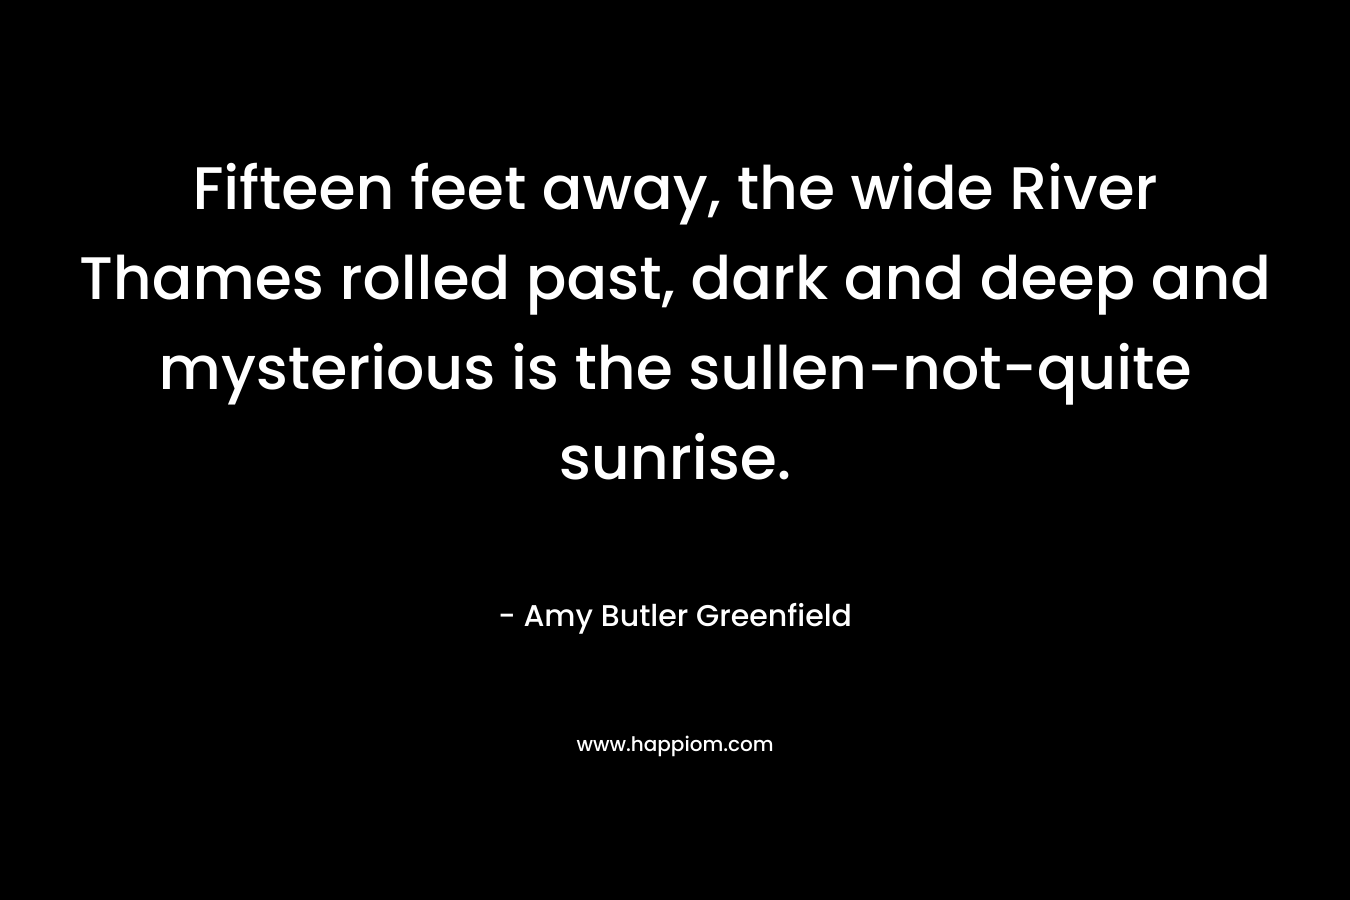 Fifteen feet away, the wide River Thames rolled past, dark and deep and mysterious is the sullen-not-quite sunrise. – Amy Butler Greenfield